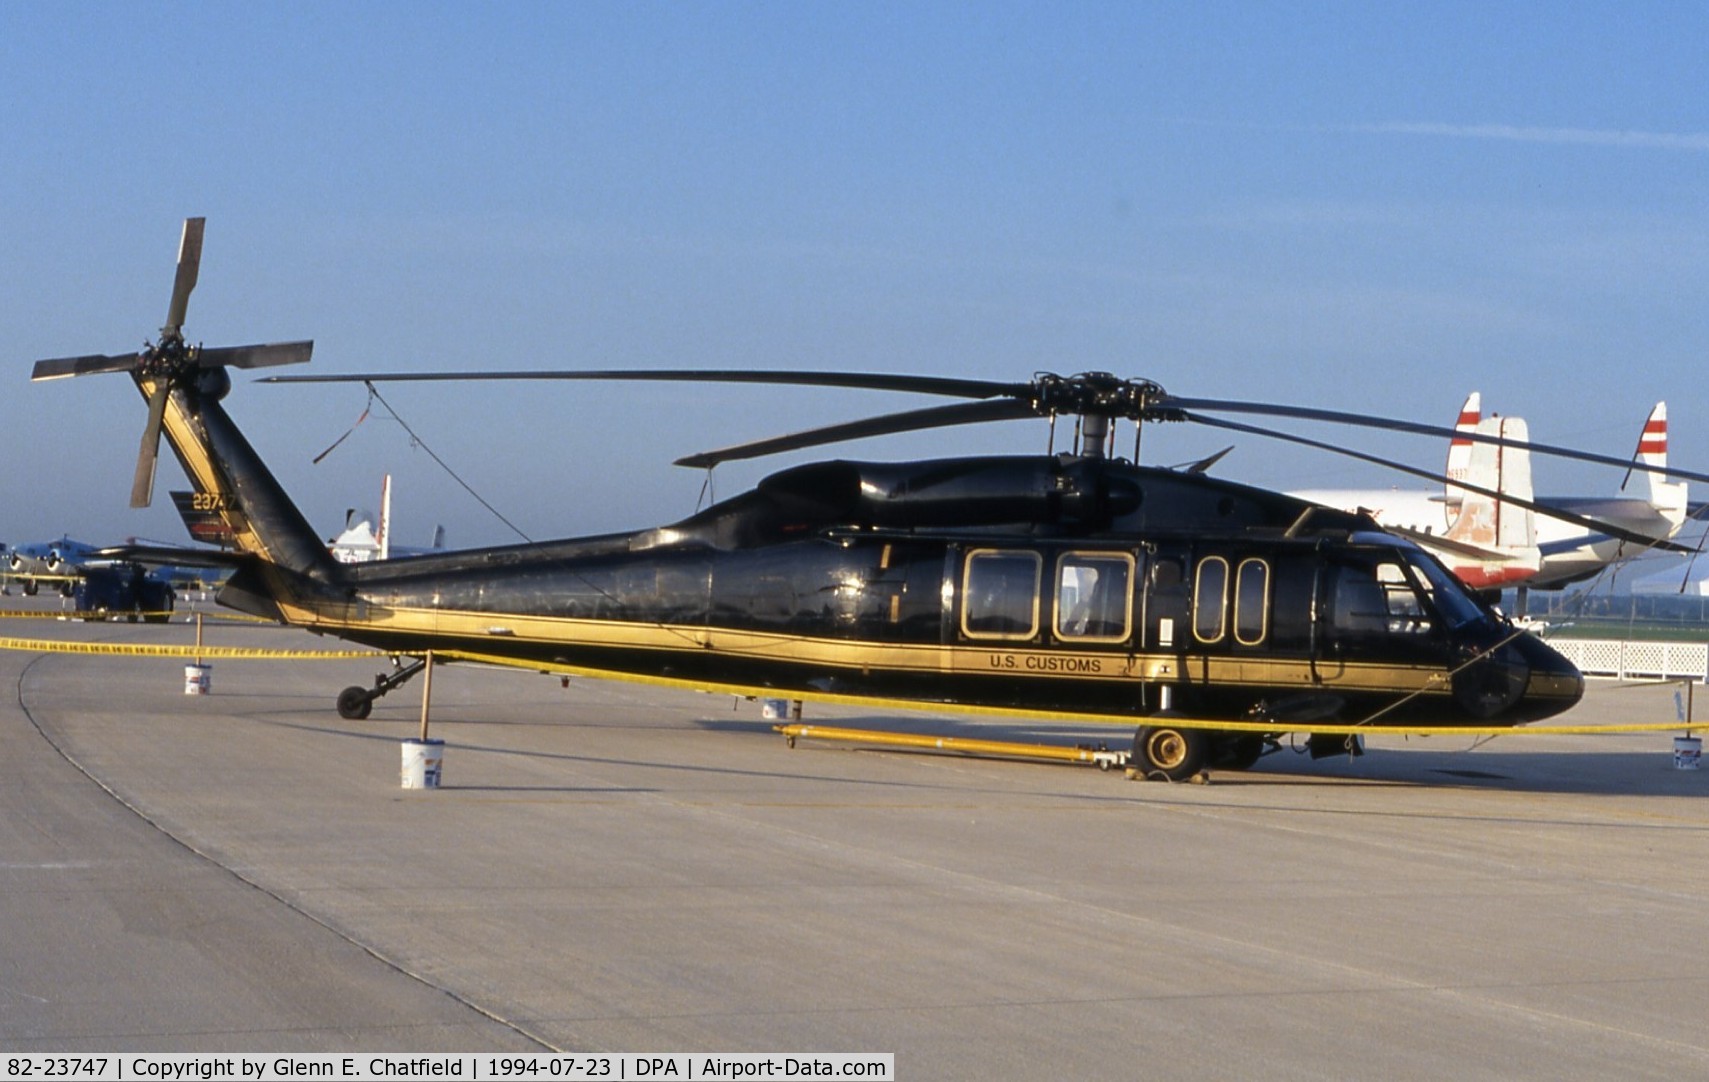 82-23747, Sikorsky UH-60A Black Hawk C/N 70.570, U.S. Customs UH-60A in for an air show